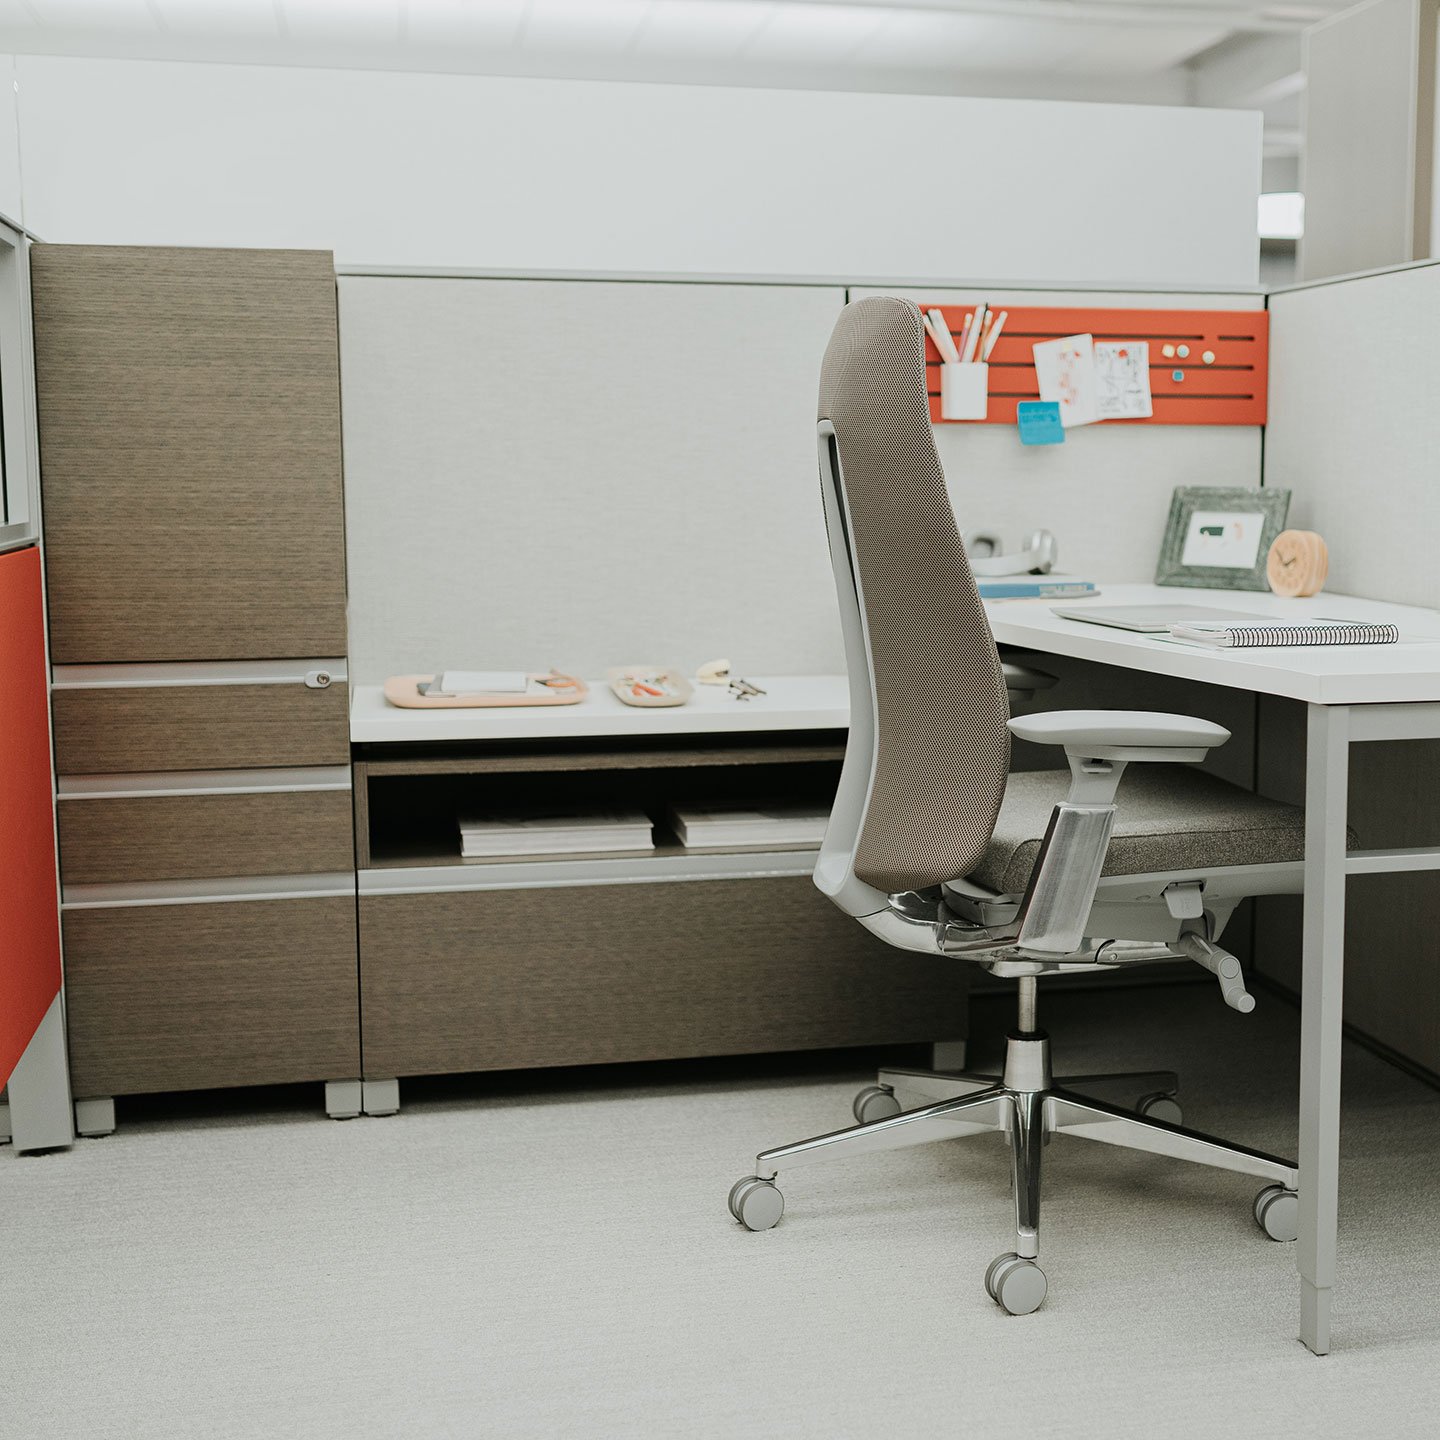 Compose storage unit with lock and file drawers at an individual workspace with gray fern chair.  